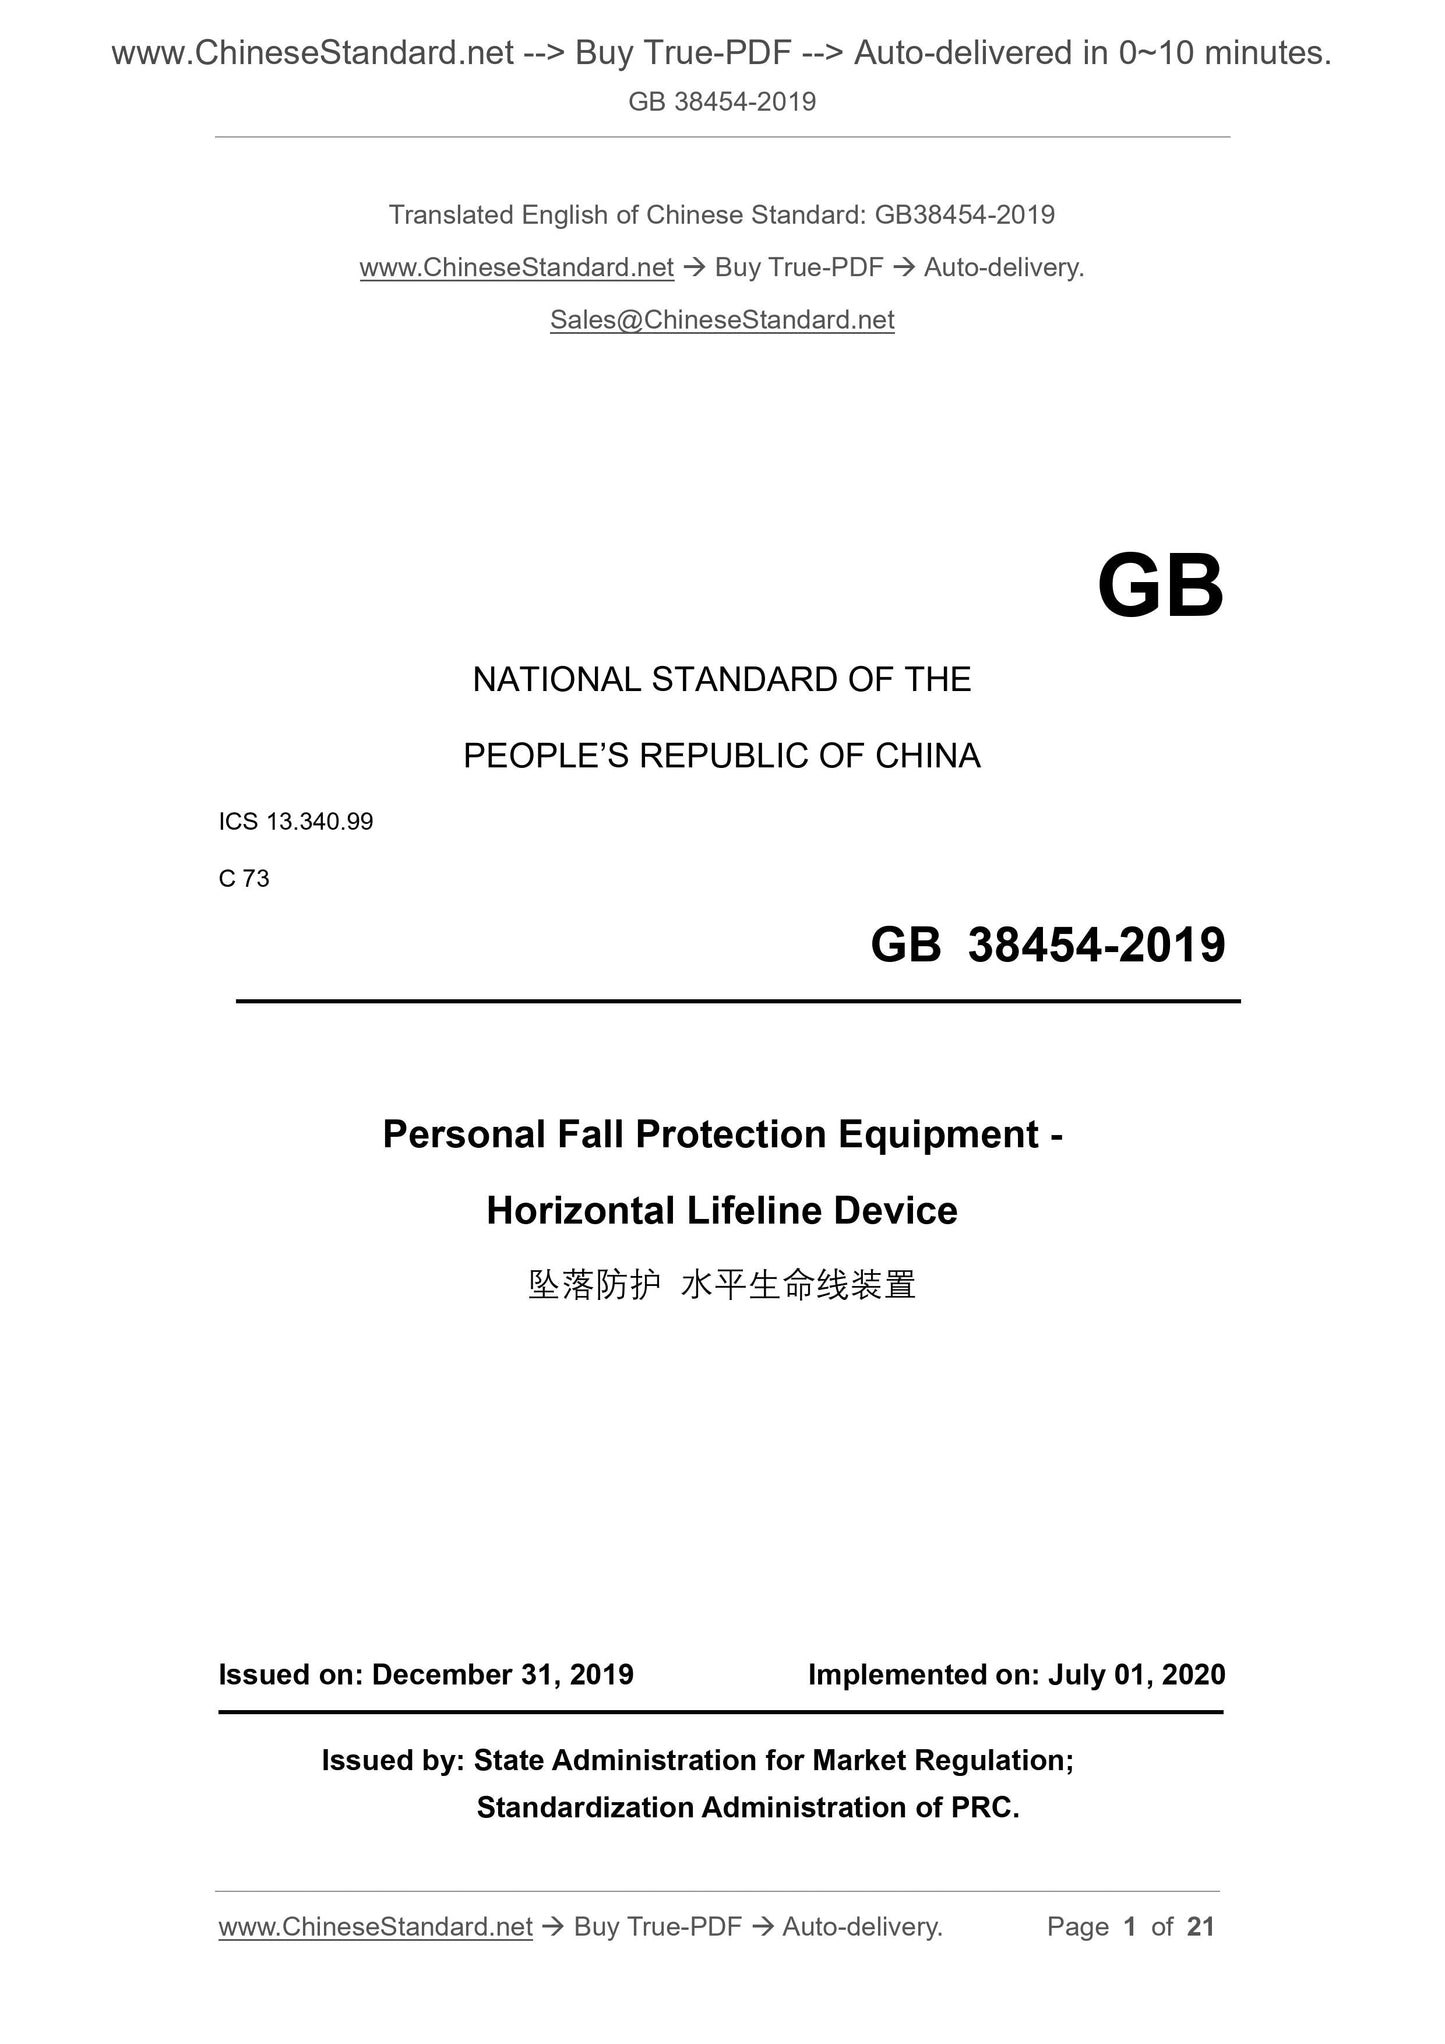 GB 38454-2019 Page 1